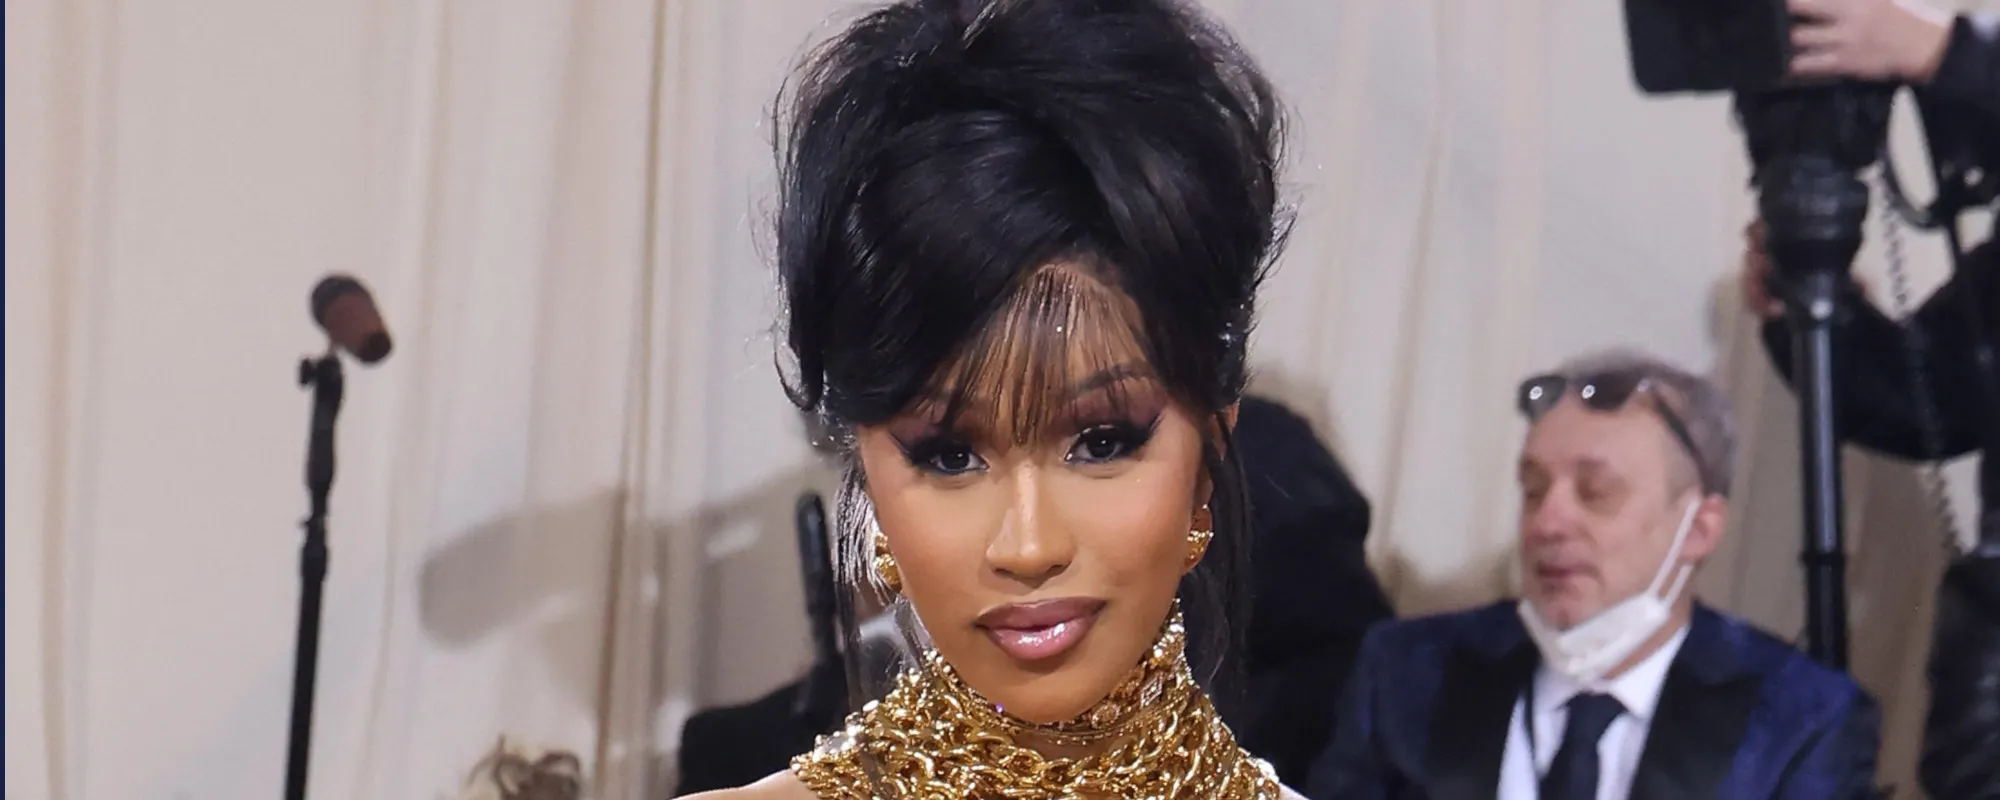 Cardi B Denies Fighting With Fan After Fending Off Concert-Goers with Microphone